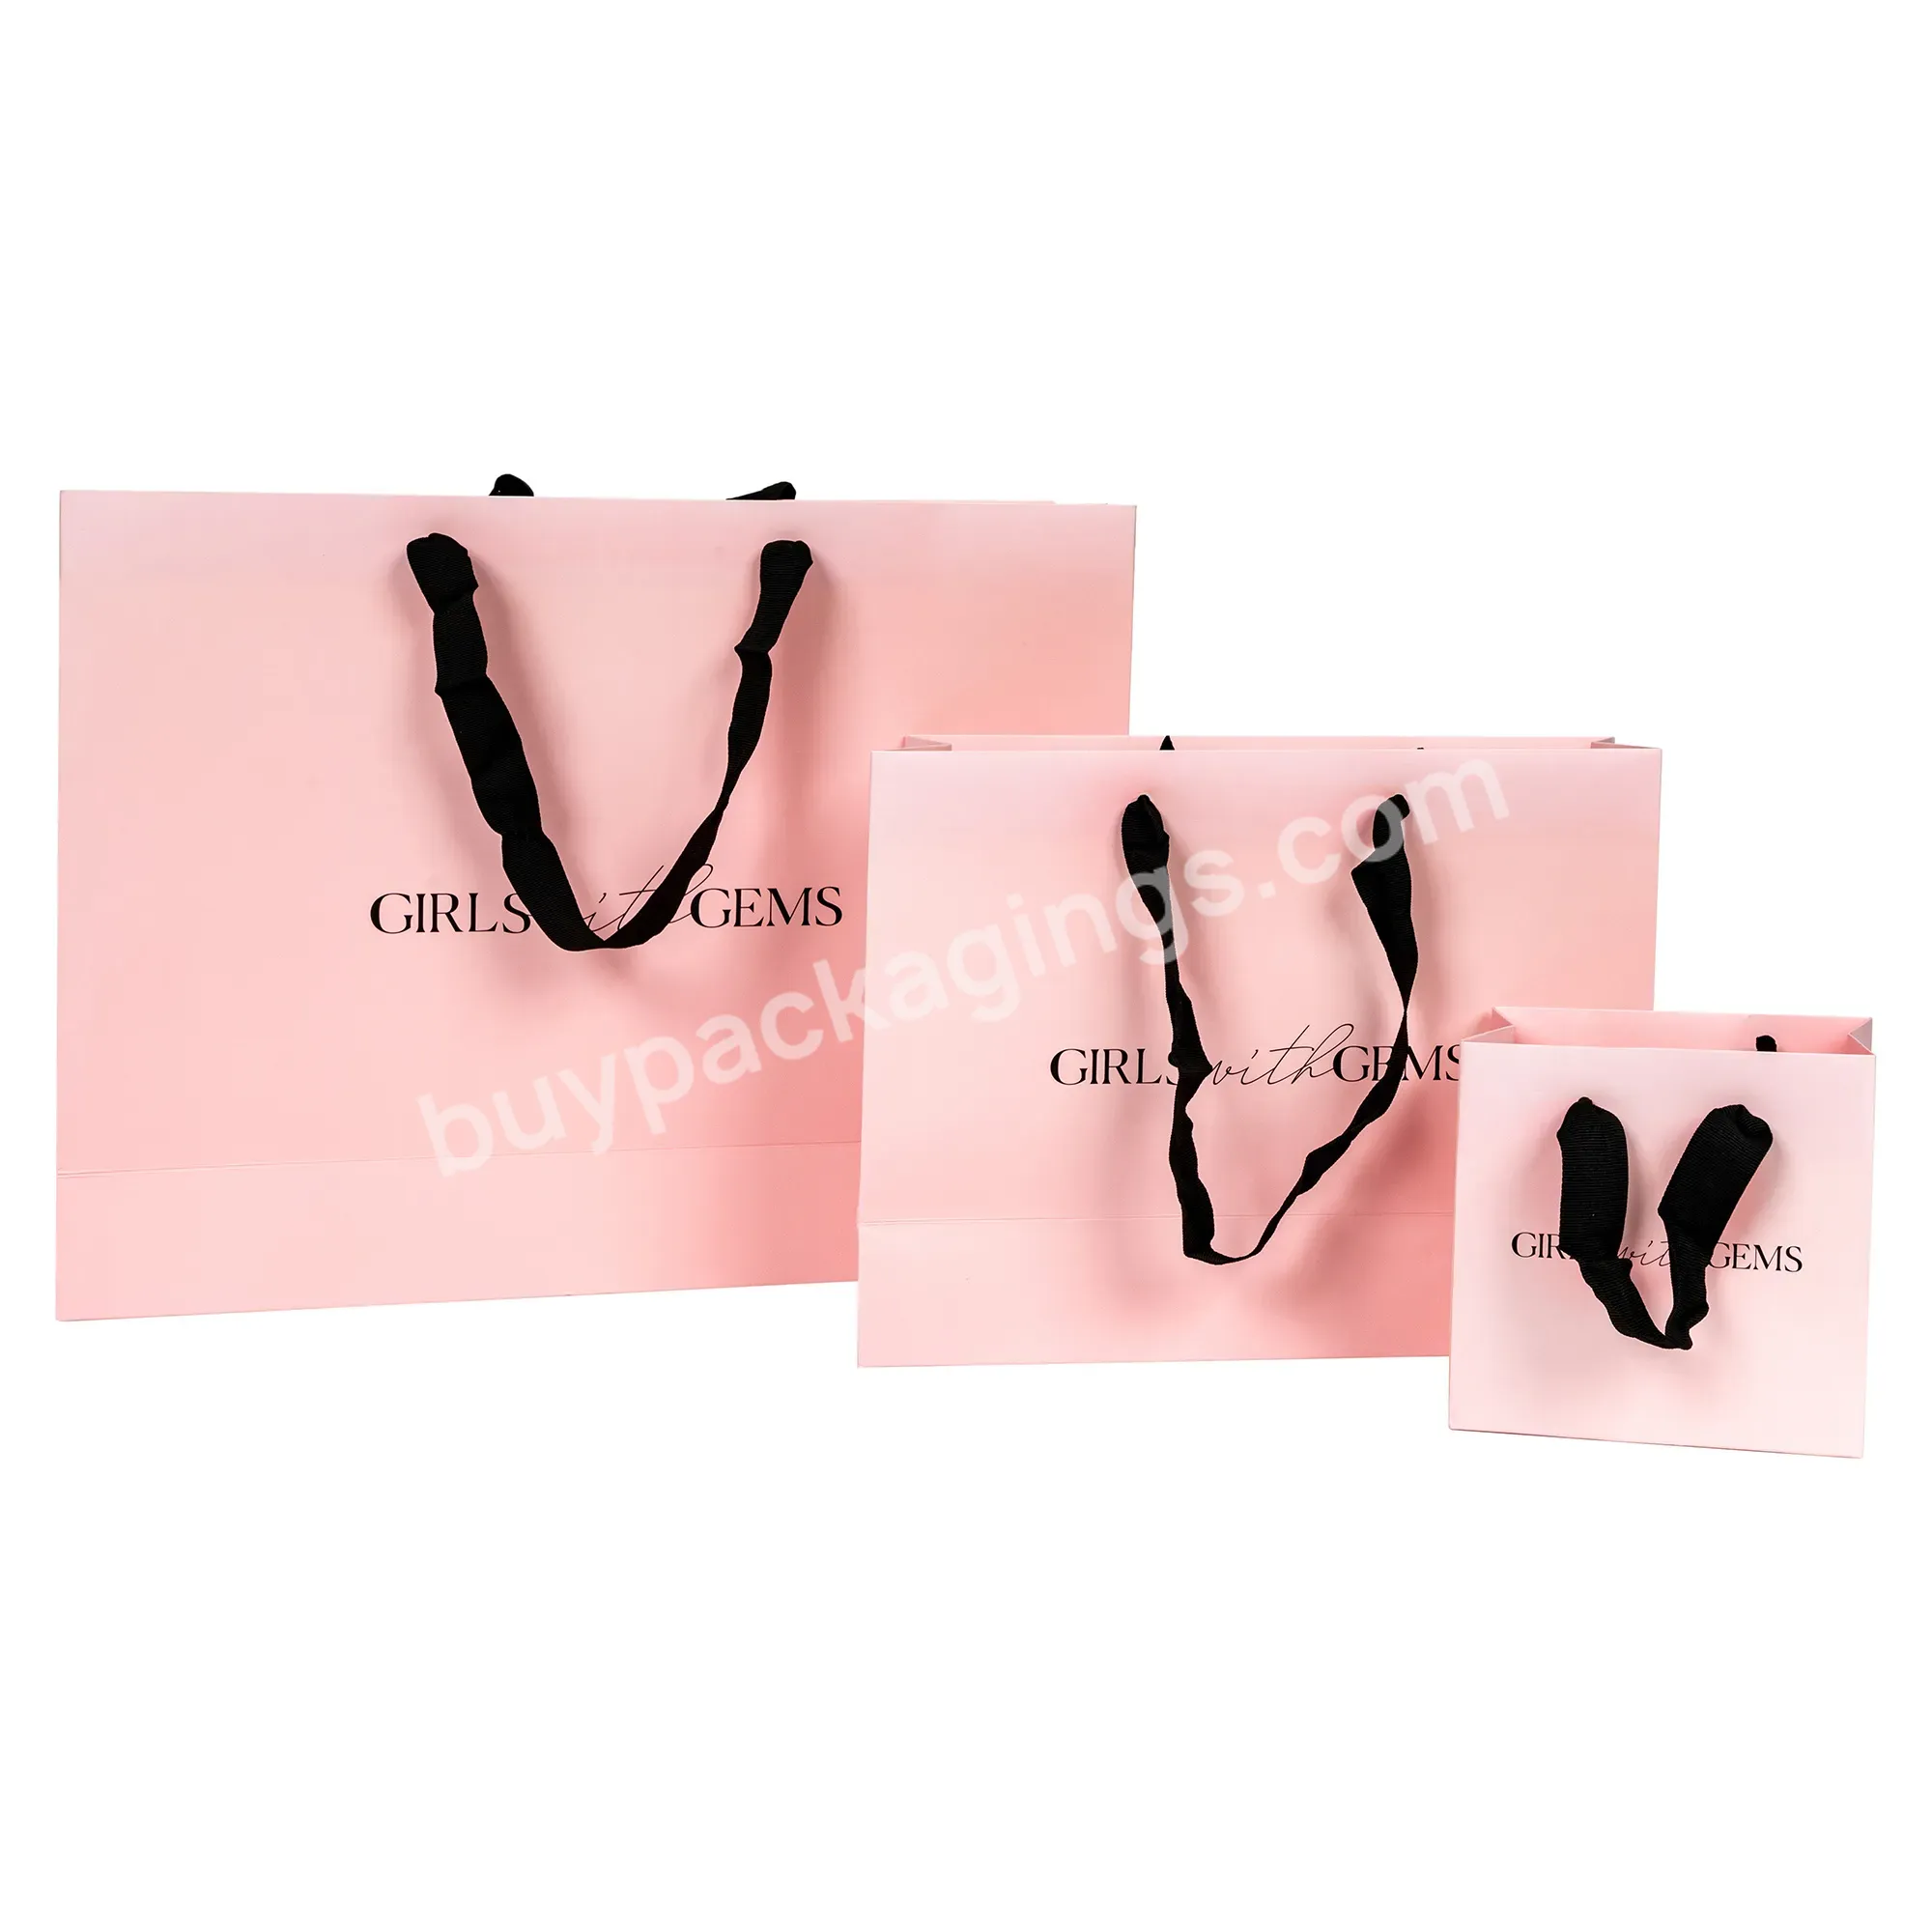 Wholesale Cheap Price Custom Logo Pink Shopping Paper Bag With Your Own Logo For Packaging